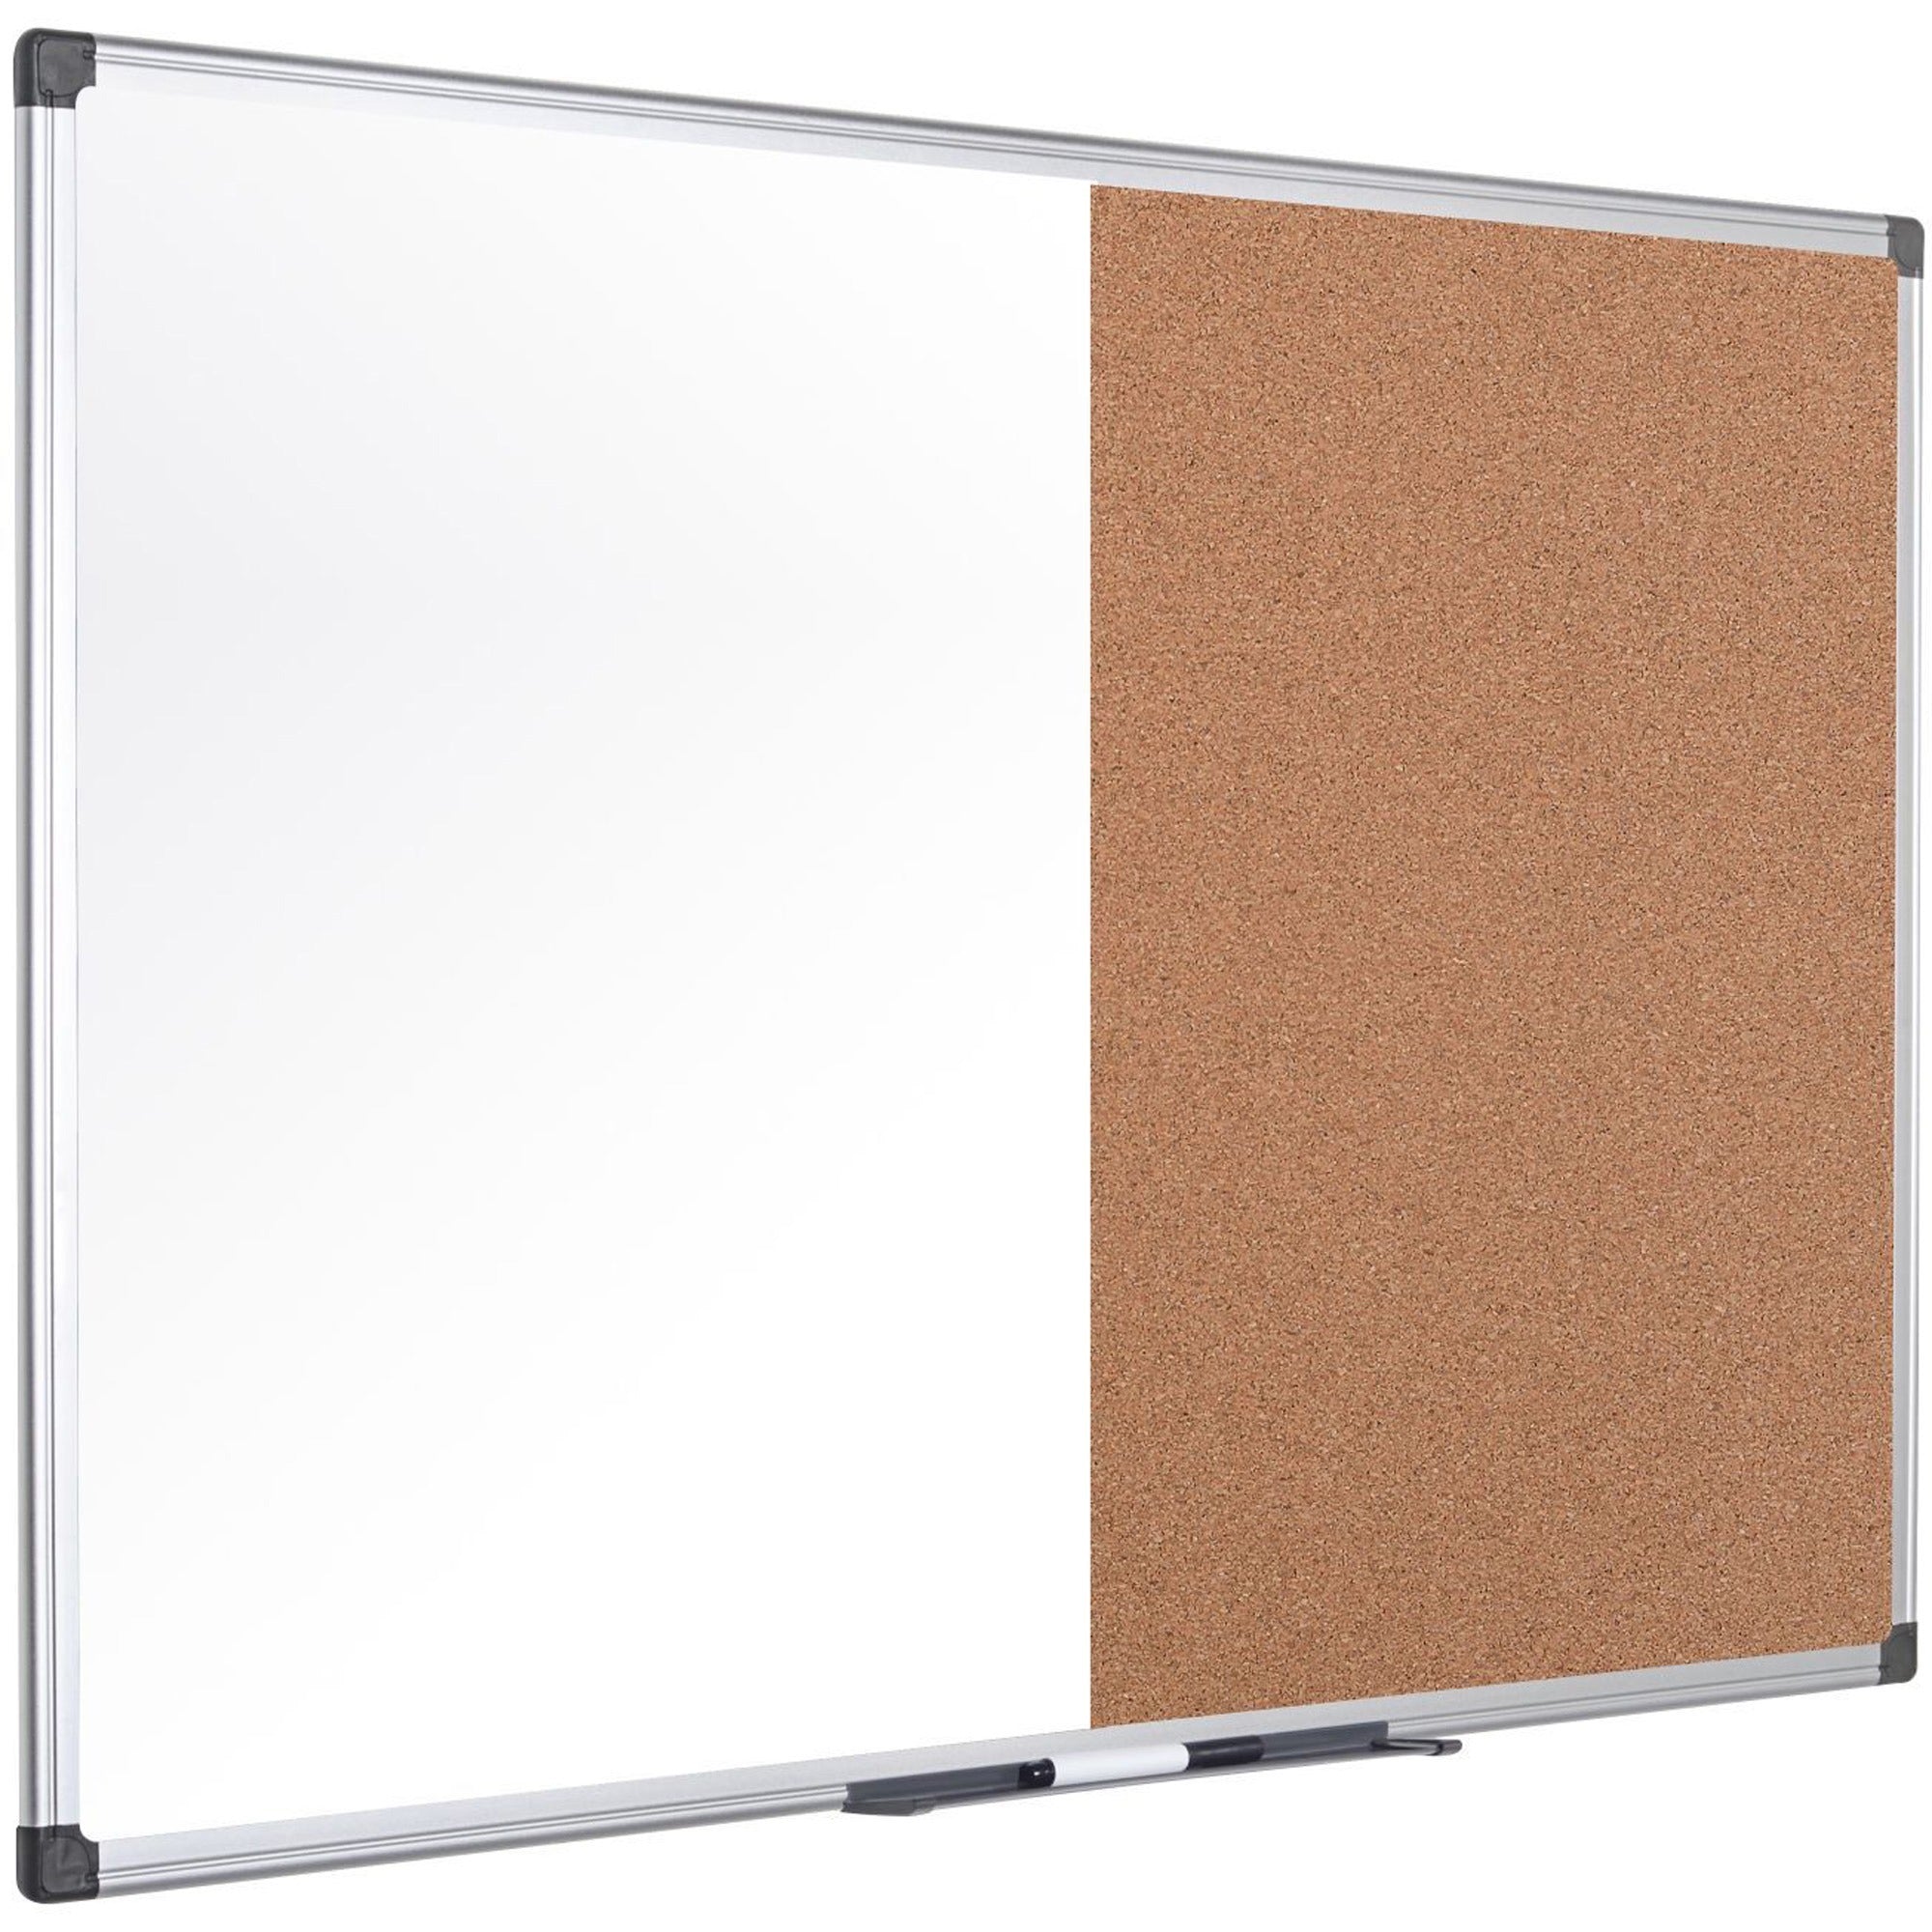 mastervision-dry-erase-combo-board-050-height-x-48-width-x-72-depth-natural-cork-melamine-surface-self-healing-resilient-easy-to-clean-dry-erase-surface-durable-silver-aluminum-frame-1-each-taa-compliant_bvcxa2702170 - 3